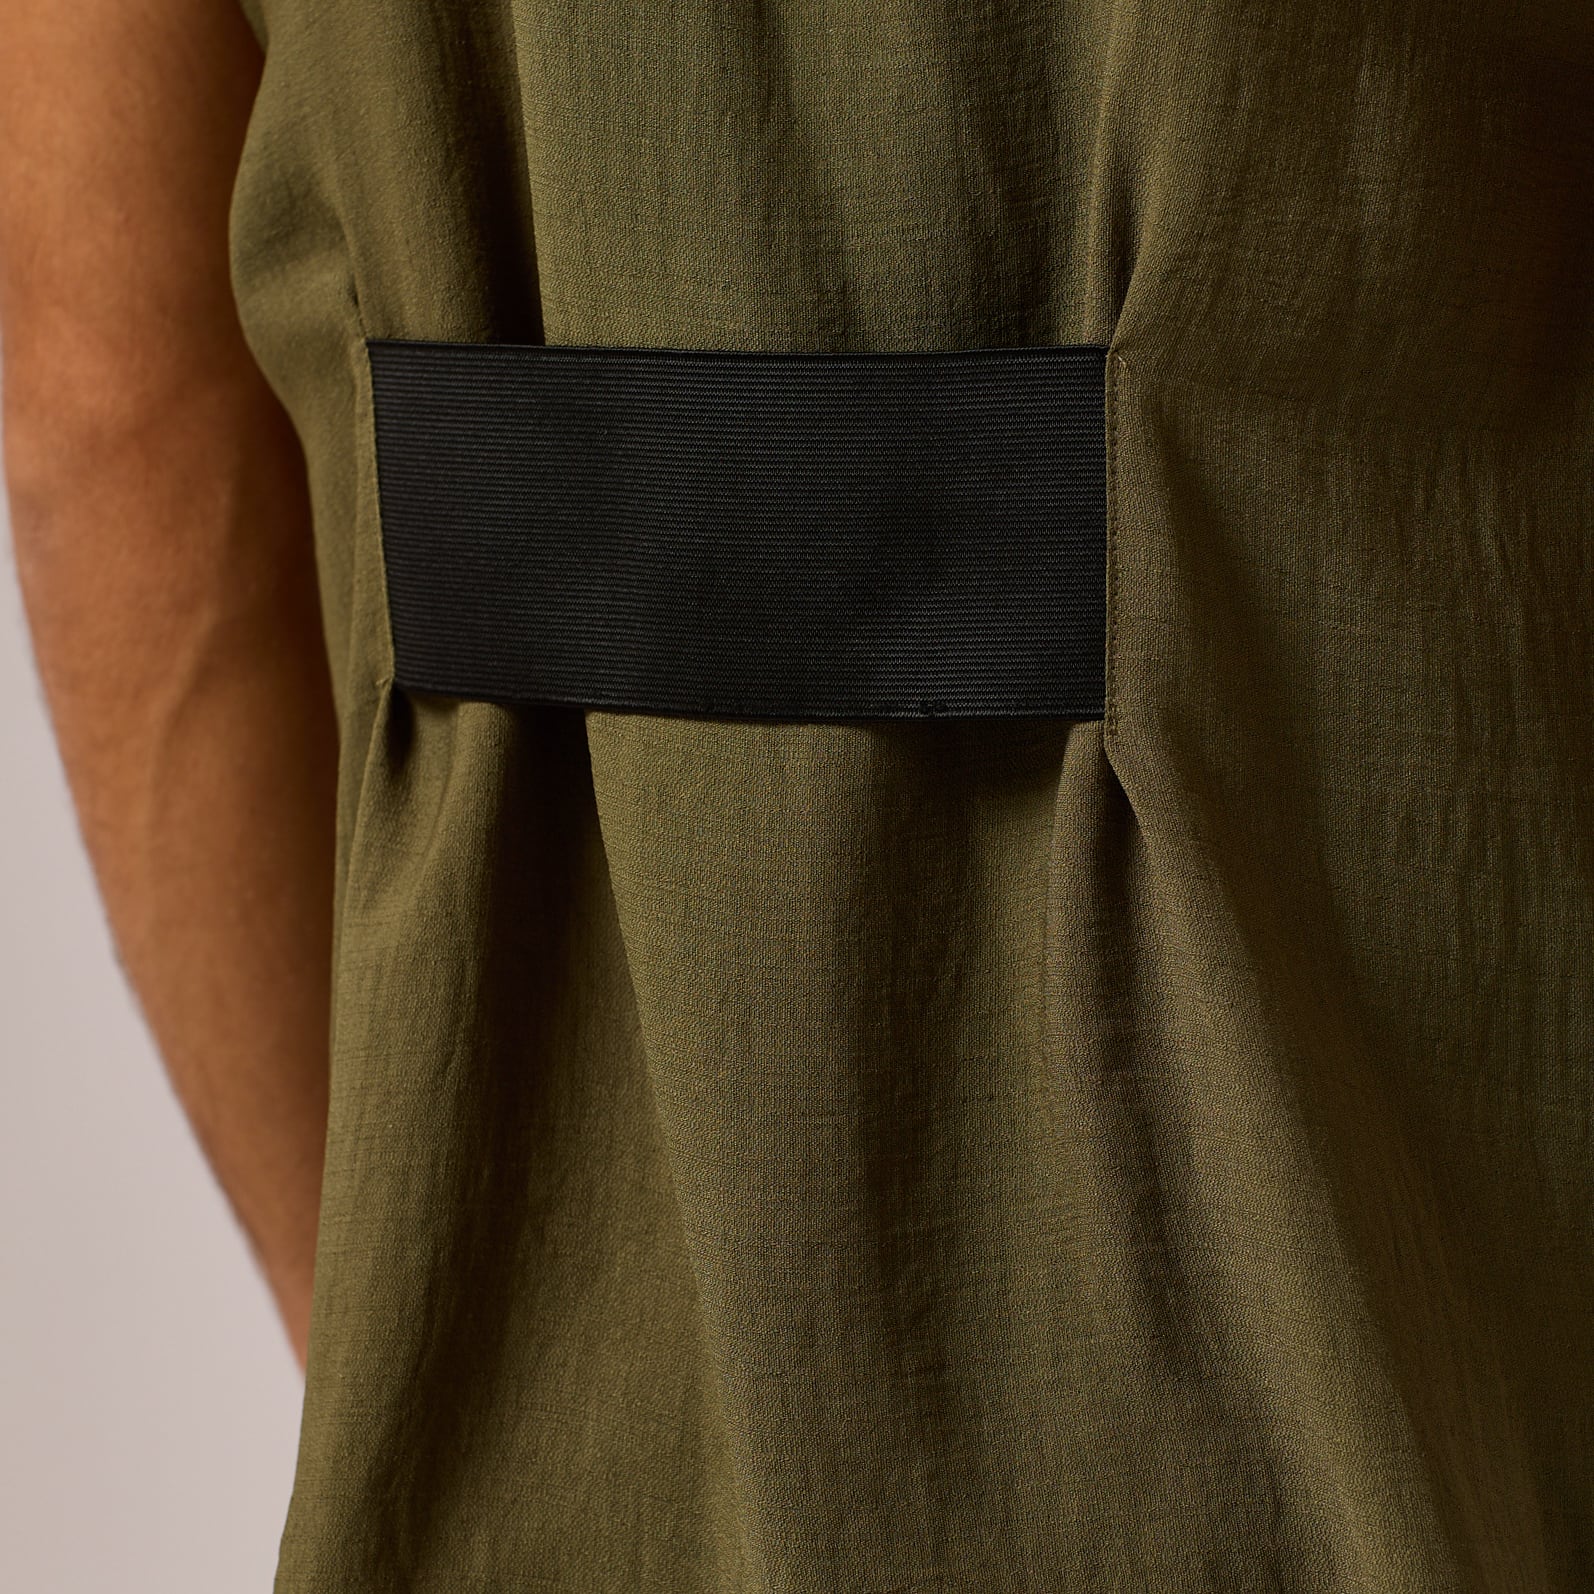   ZERØ London - Close up view, olive green mens zero waste vest designed & made in London